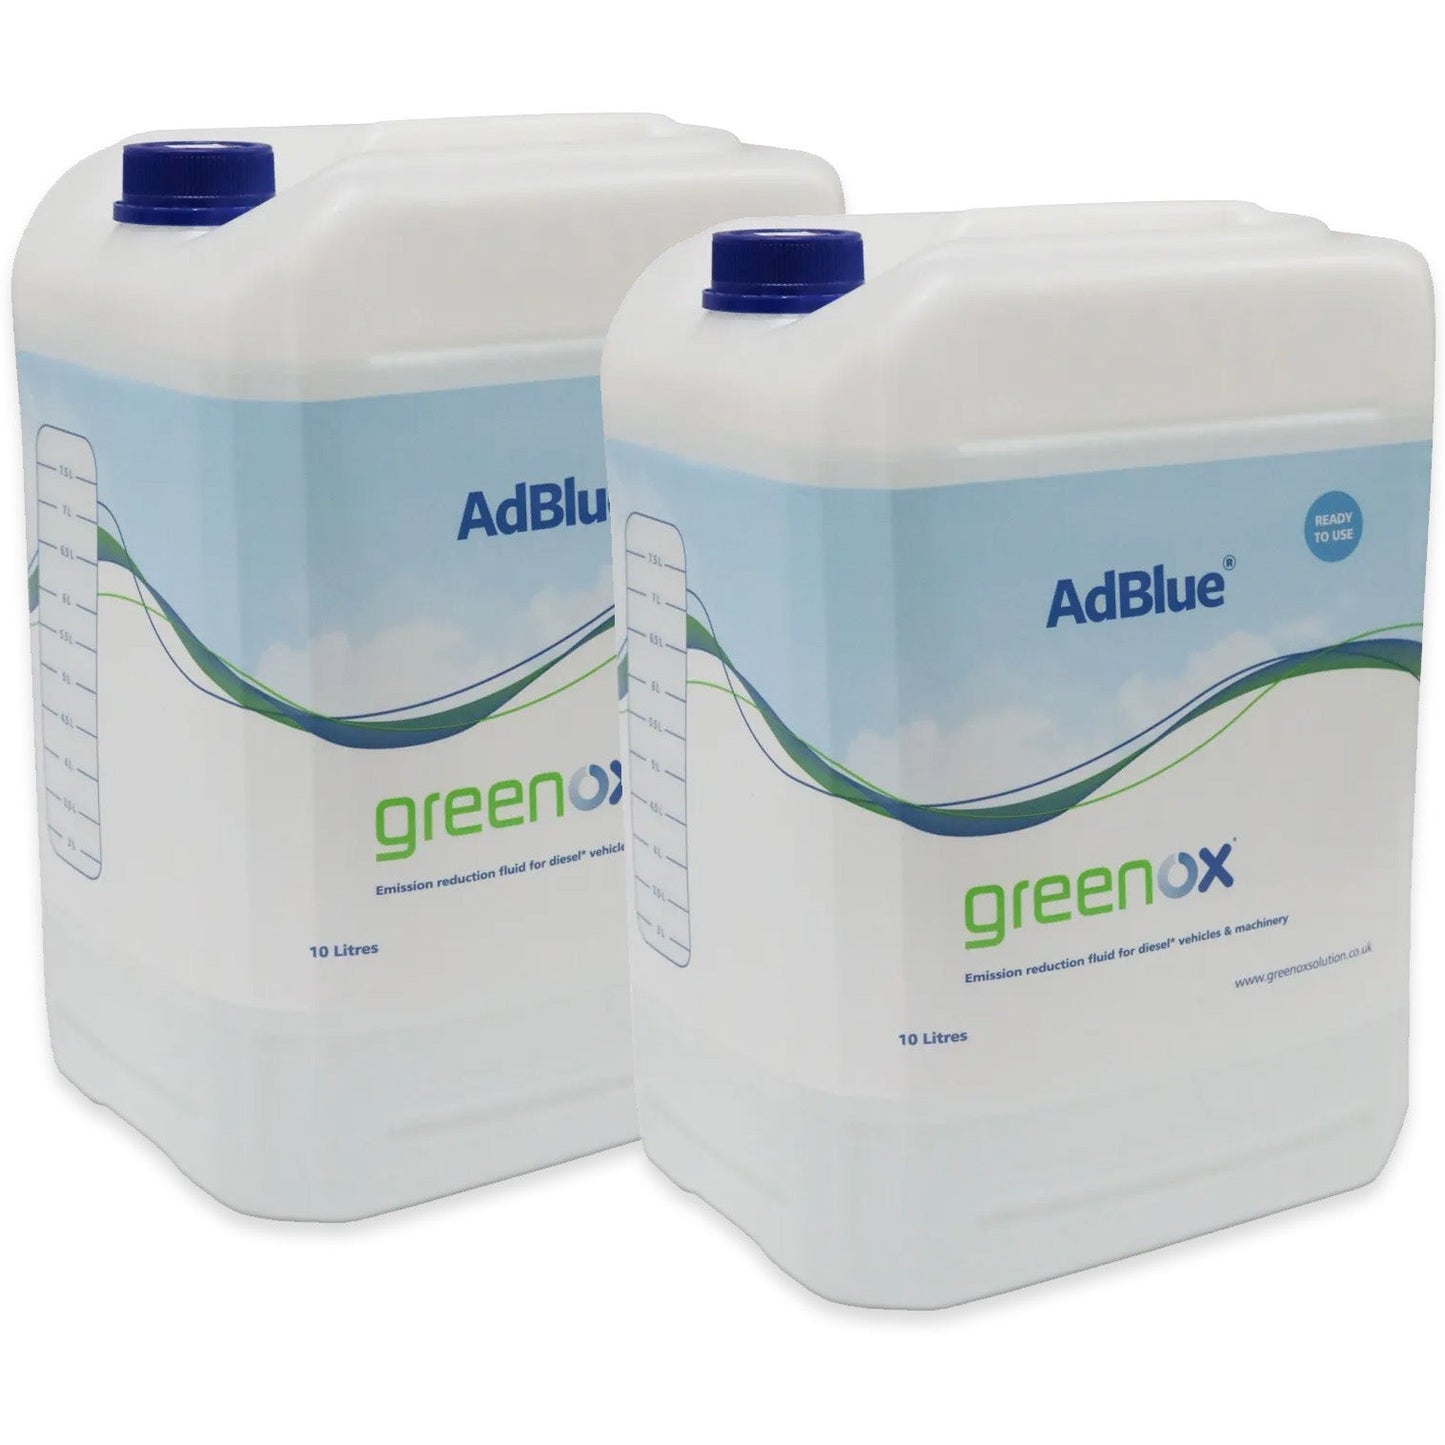 Greenox AdBlue AD910 Solution, 2 x 10 Litre, 20L Litres in total For Cars & Vans